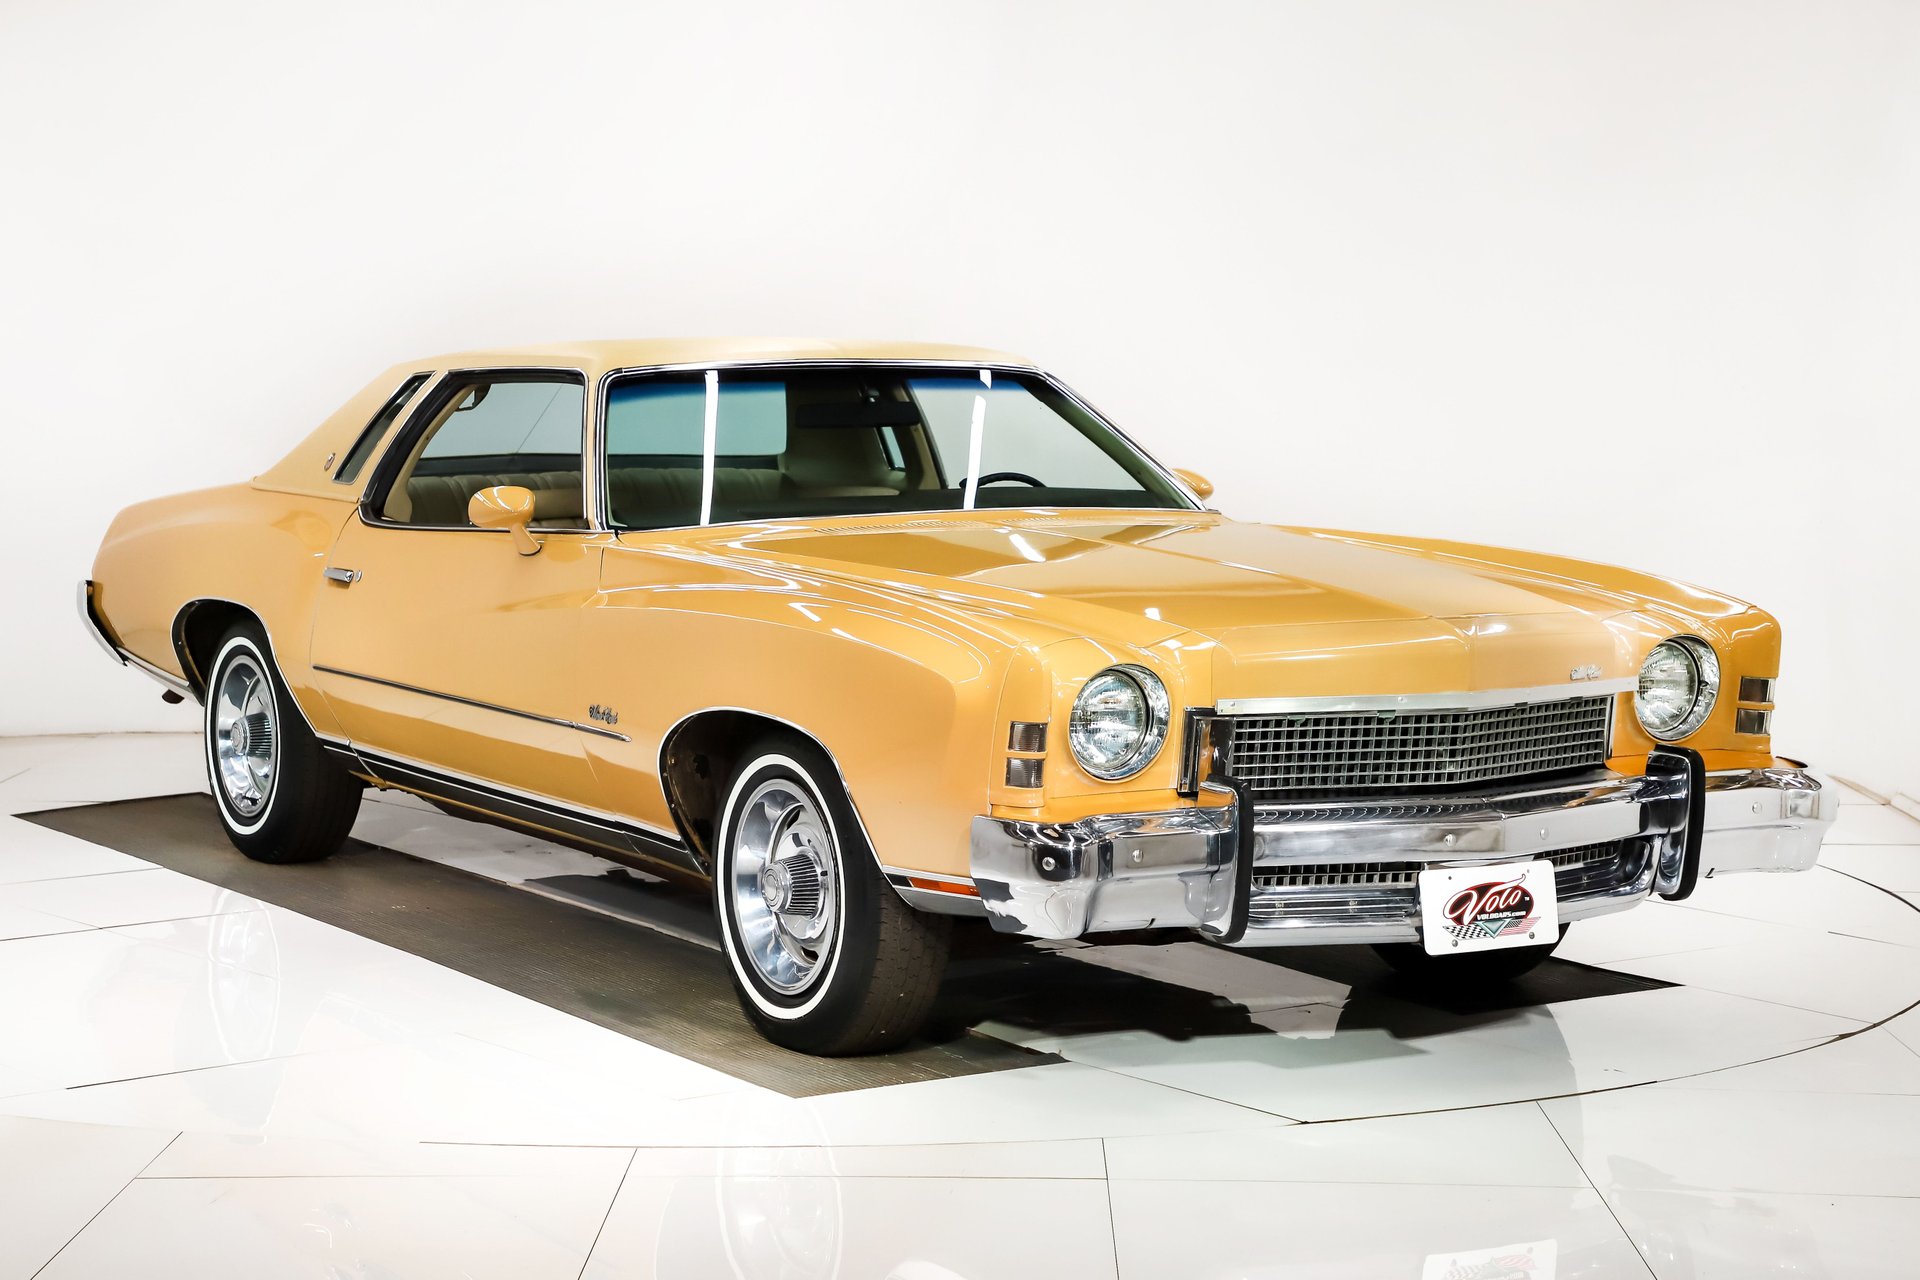 Classic Survivor: The 1973 Chevrolet Monte Carlo with Only 10,568 Actual Miles